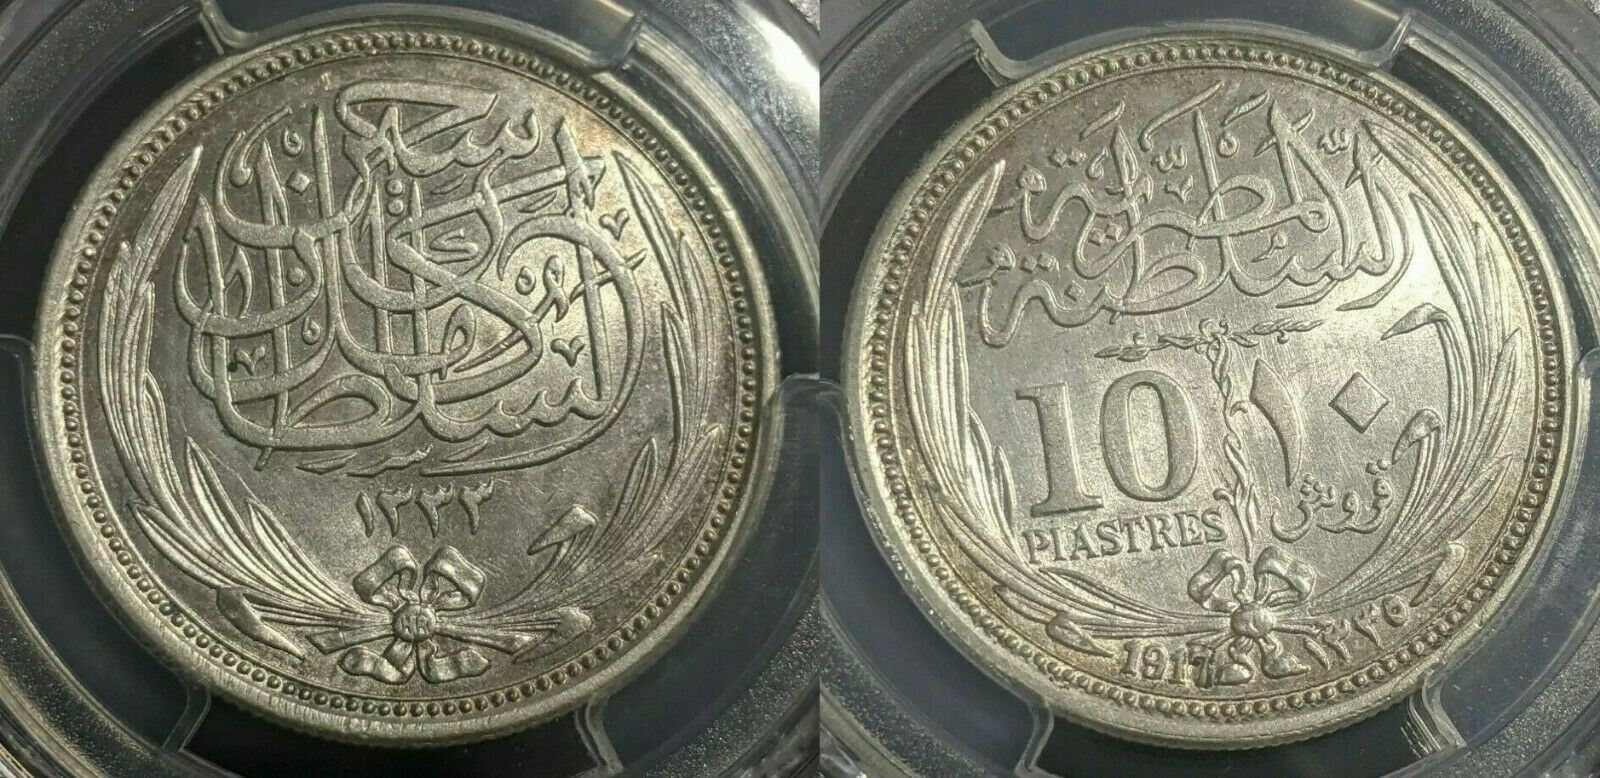 Egypt AH 1335 - 1917 Ten Piastres 10 Pst Occupation Coinage KM# 319 PCGS MS61